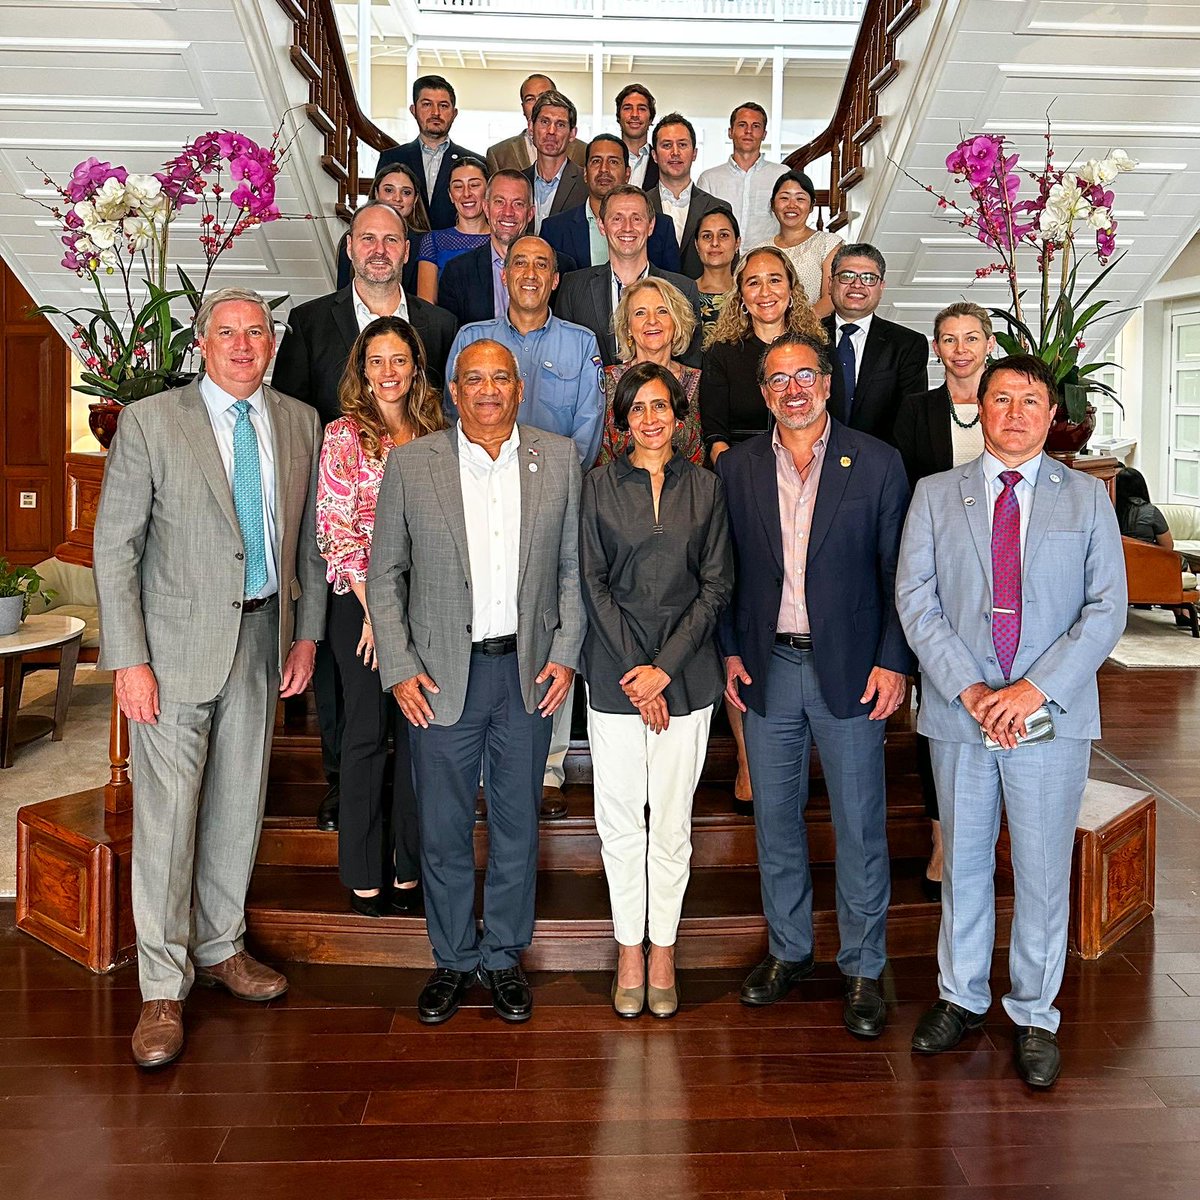 We had a great meeting in today with the #CMAR ministers and donors of the #ConnectToProtect coalition, investing $118 M to create a transnational marine protected area covering 600,000 km2 in the Eastern Tropical Pacific Ocean. #Ecuador, #CostaRica , #Colombia, #Panama